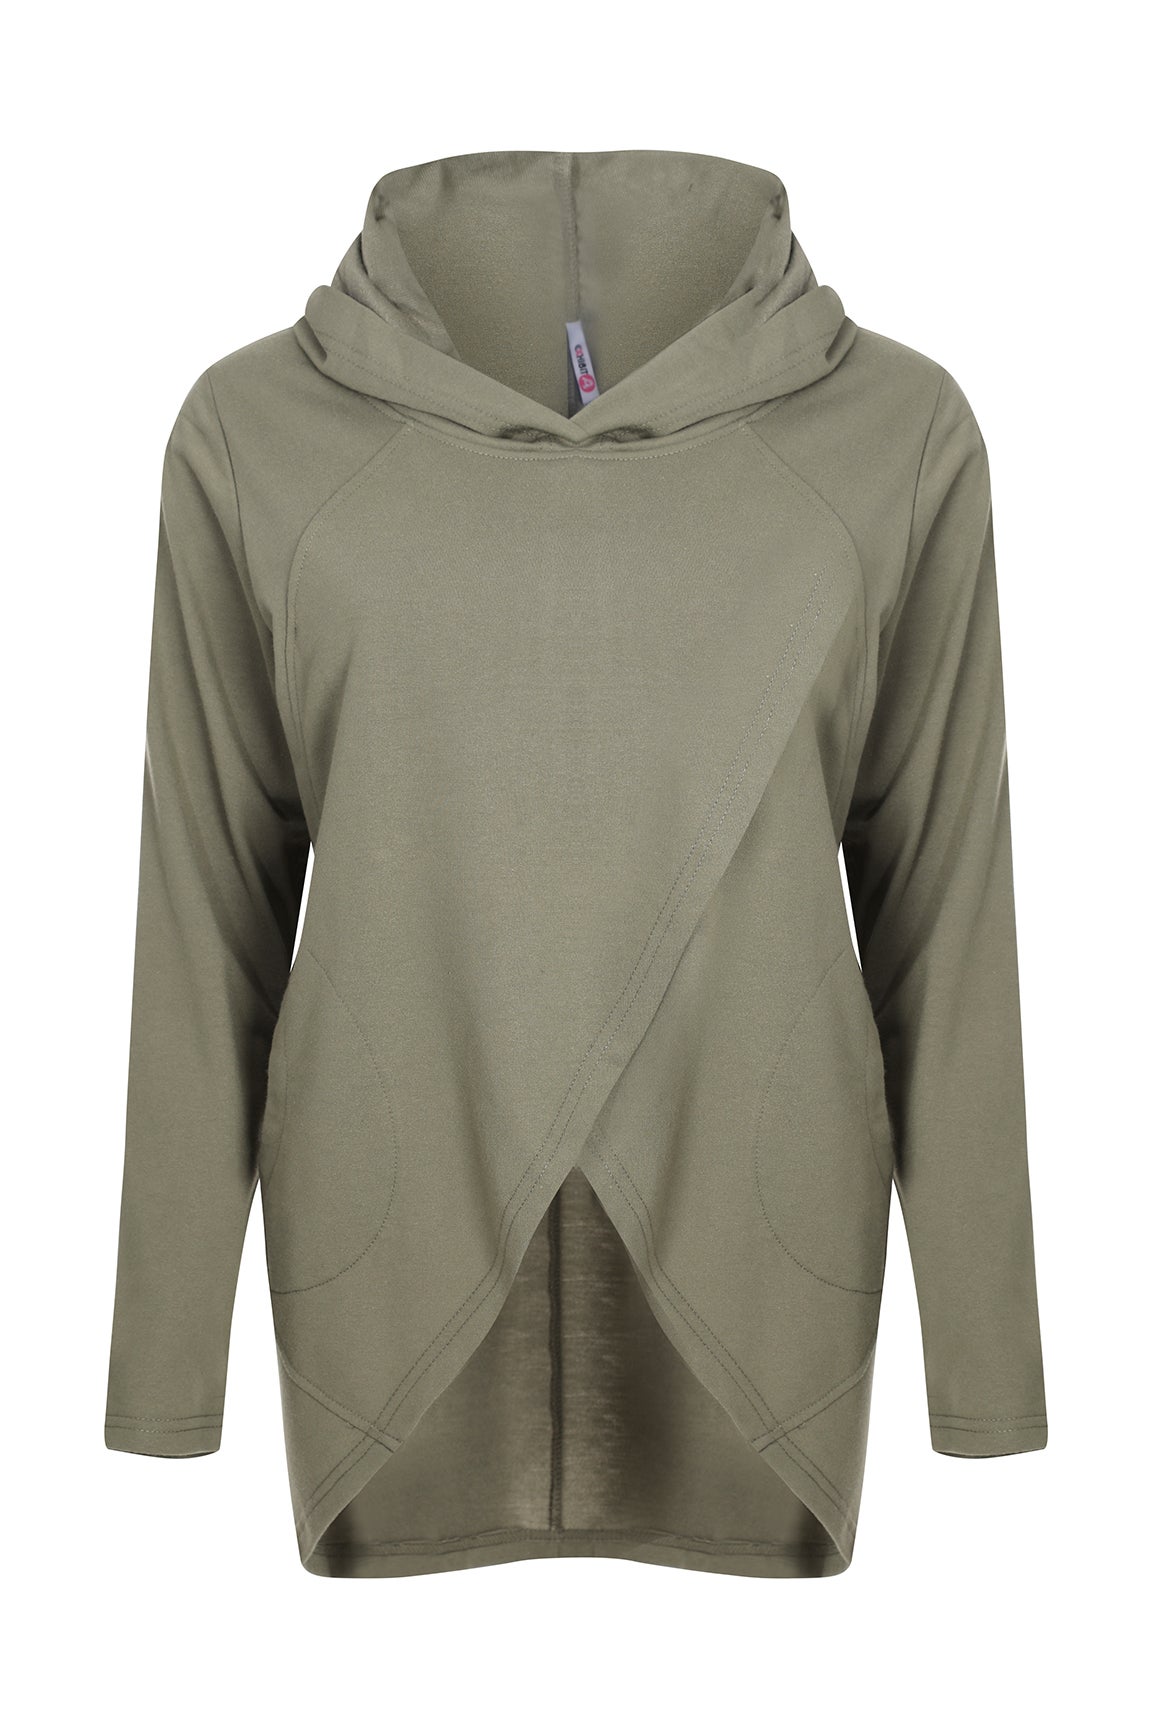 https://www.carolineeve.co.nz/content/products/tunic-curved-hem-hood-long-sleeve-hsp-76cm-to-lp-sage-3-4403mm.jpg